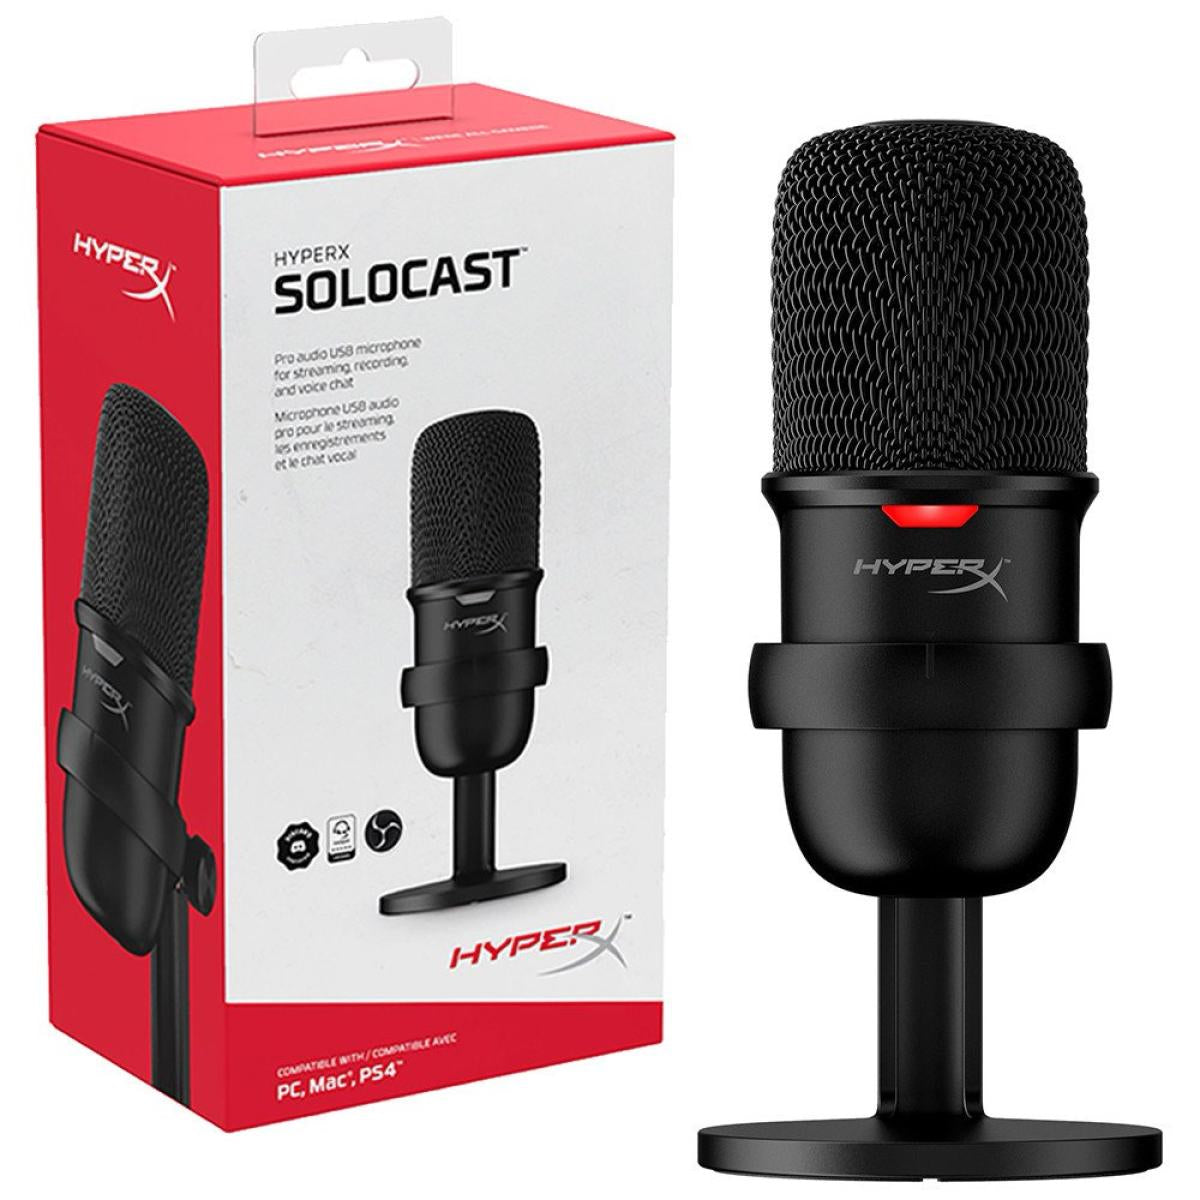 HP HyperX SoloCast USB Condenser Gaming Microphone, for PC, PS4, and Mac